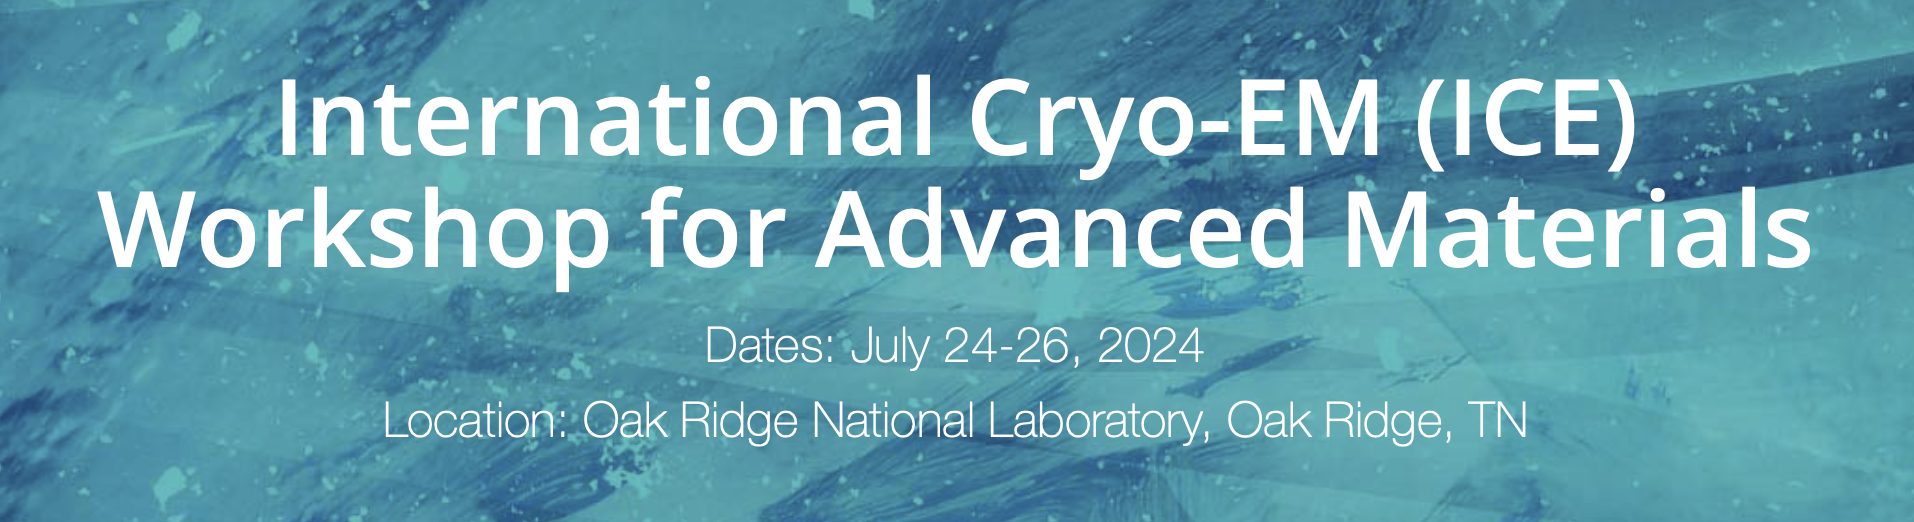 The 2nd International Cryo-EM (ICE) Workshop for Advanced Materials